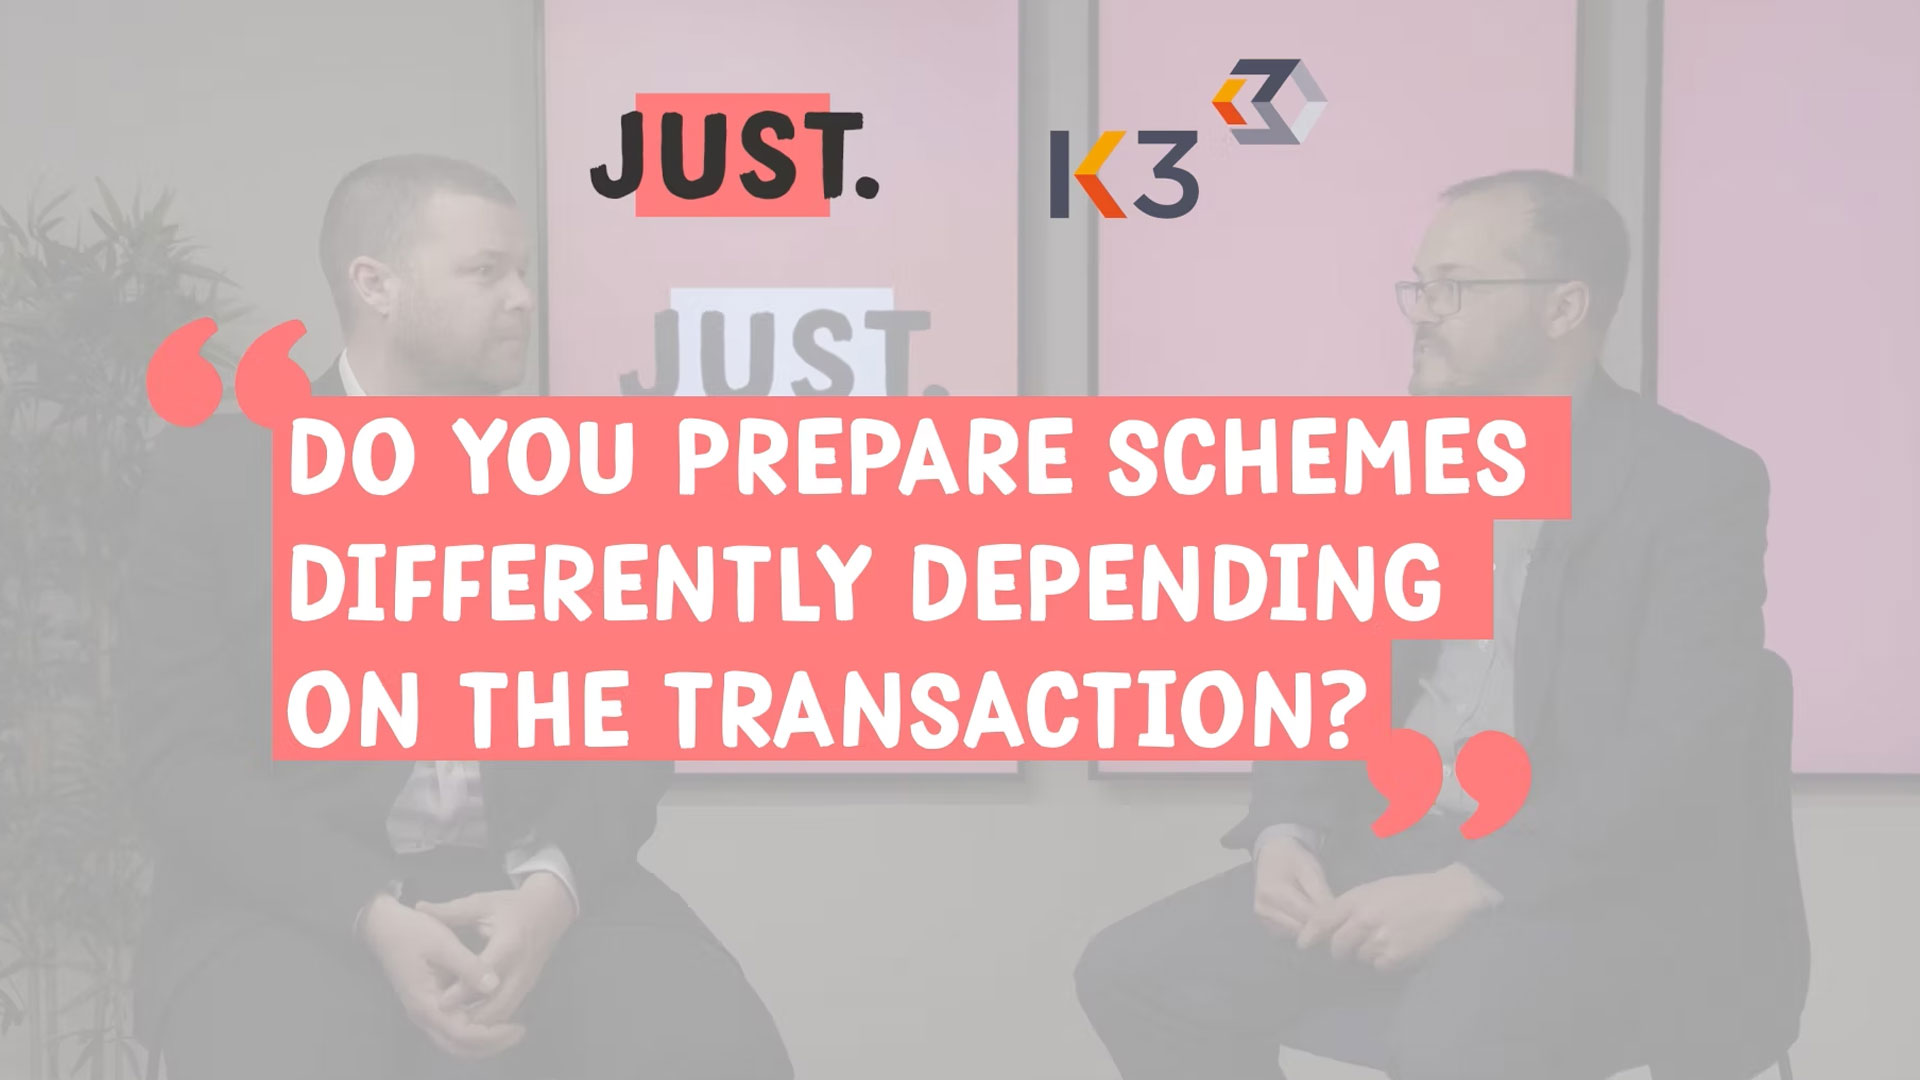 Do you prepare schemes differently depending on the transaction?